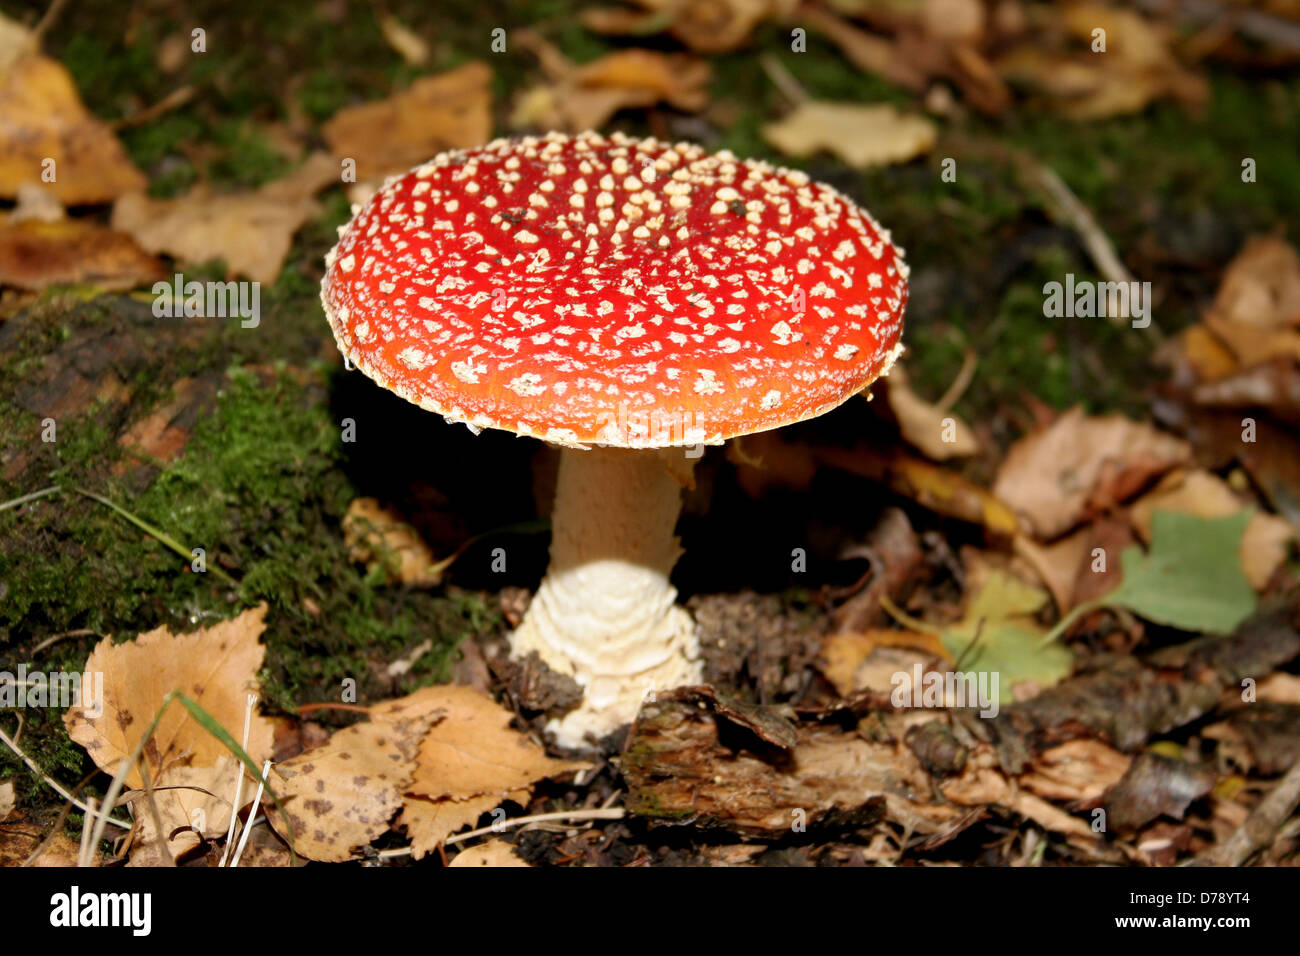 Fly agaric, Amanita muscaria, British fungus with red cap and white spots. Stock Photo